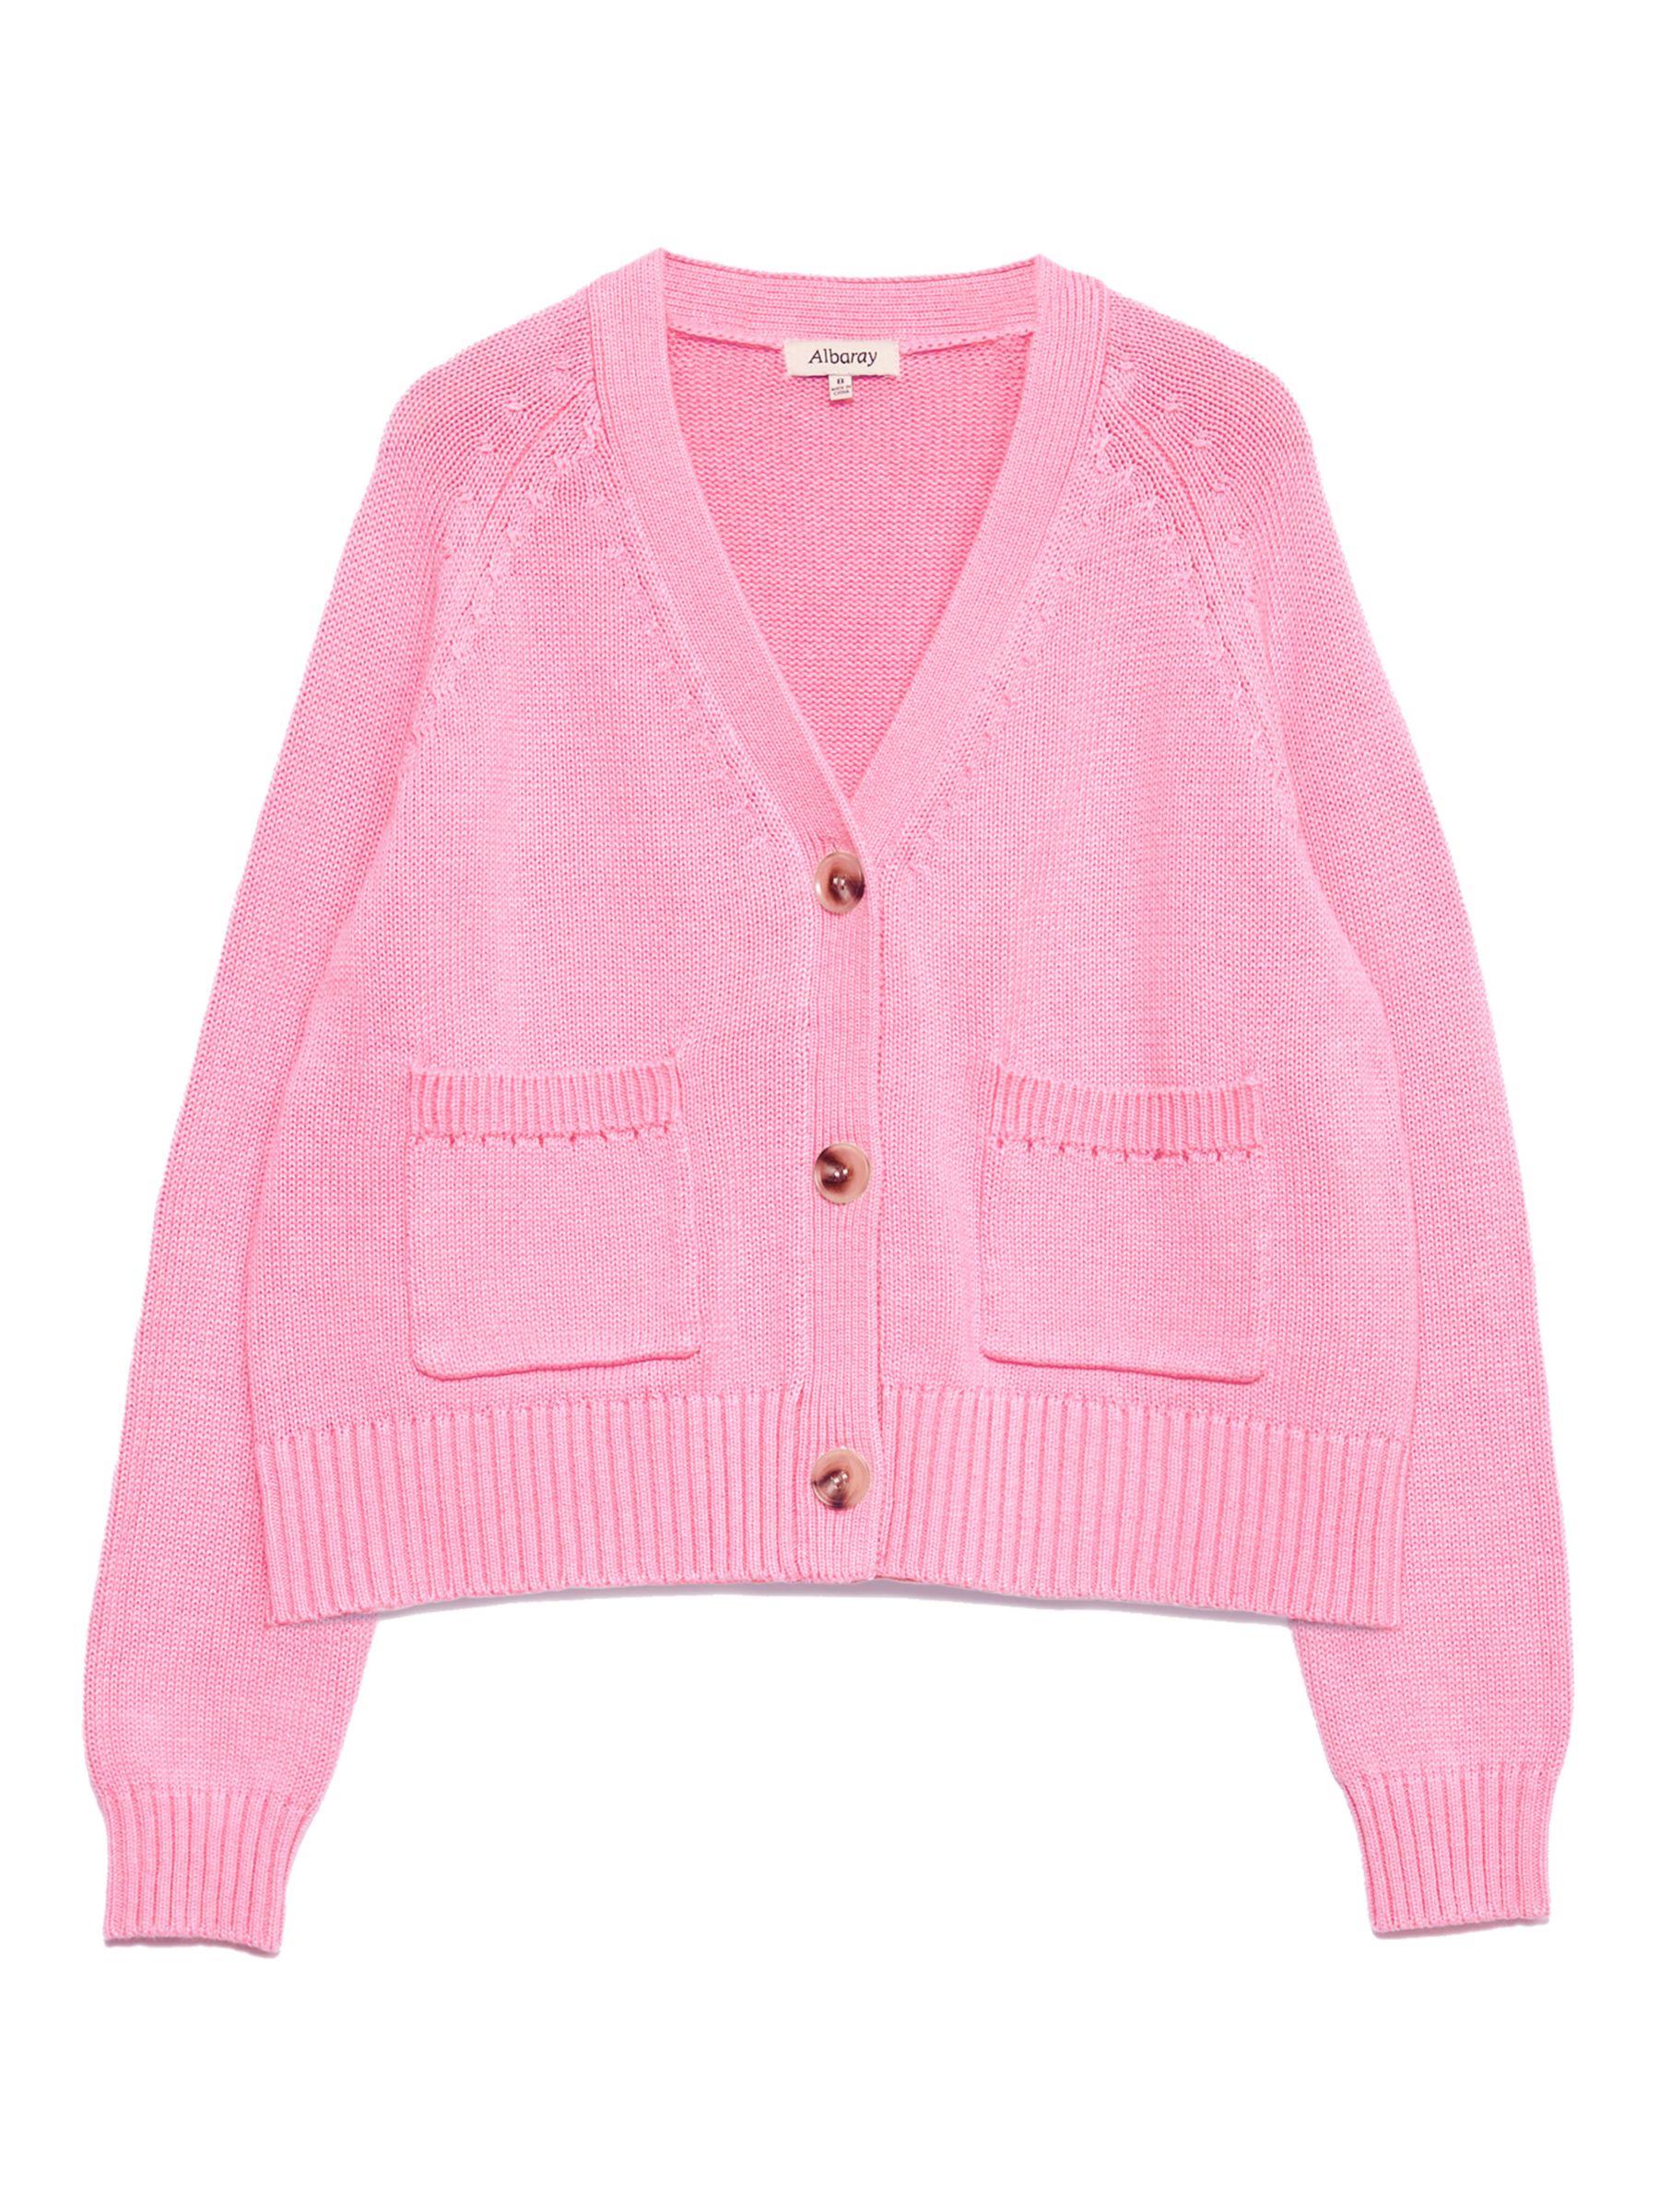 Buy Albaray Relaxed Cotton Cardigan Online at johnlewis.com